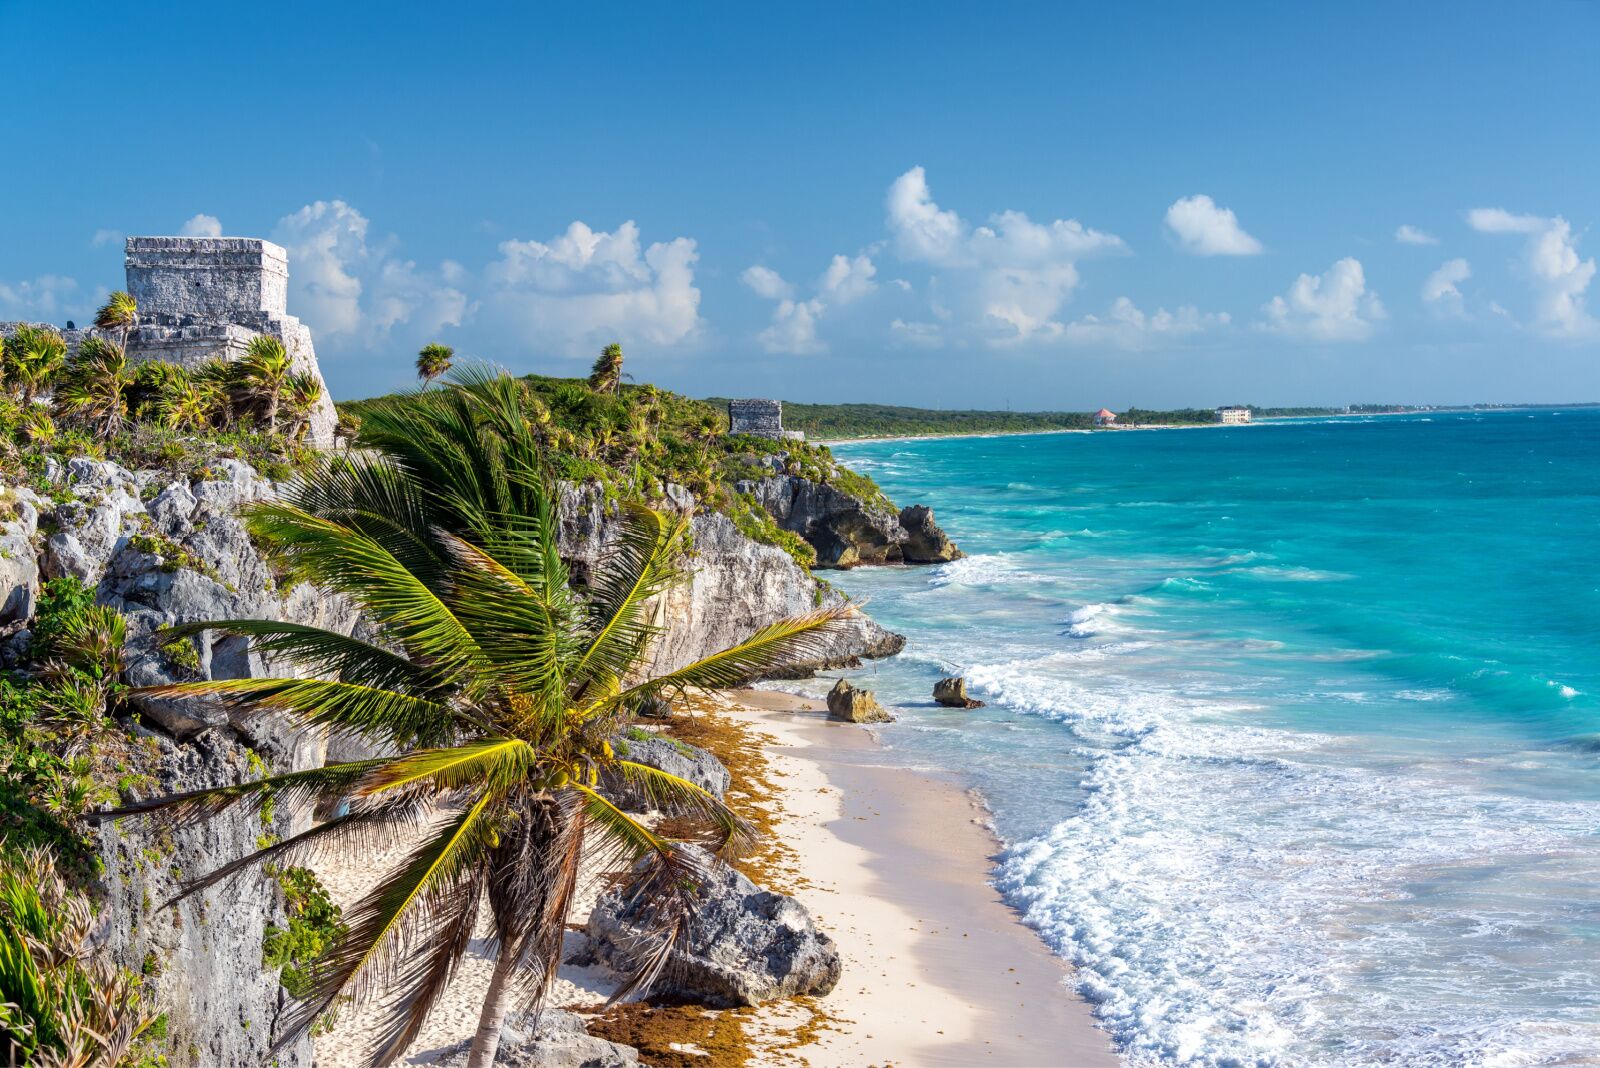 La Valise Tulum is on Tulum beach near this archeological site from the Mayans